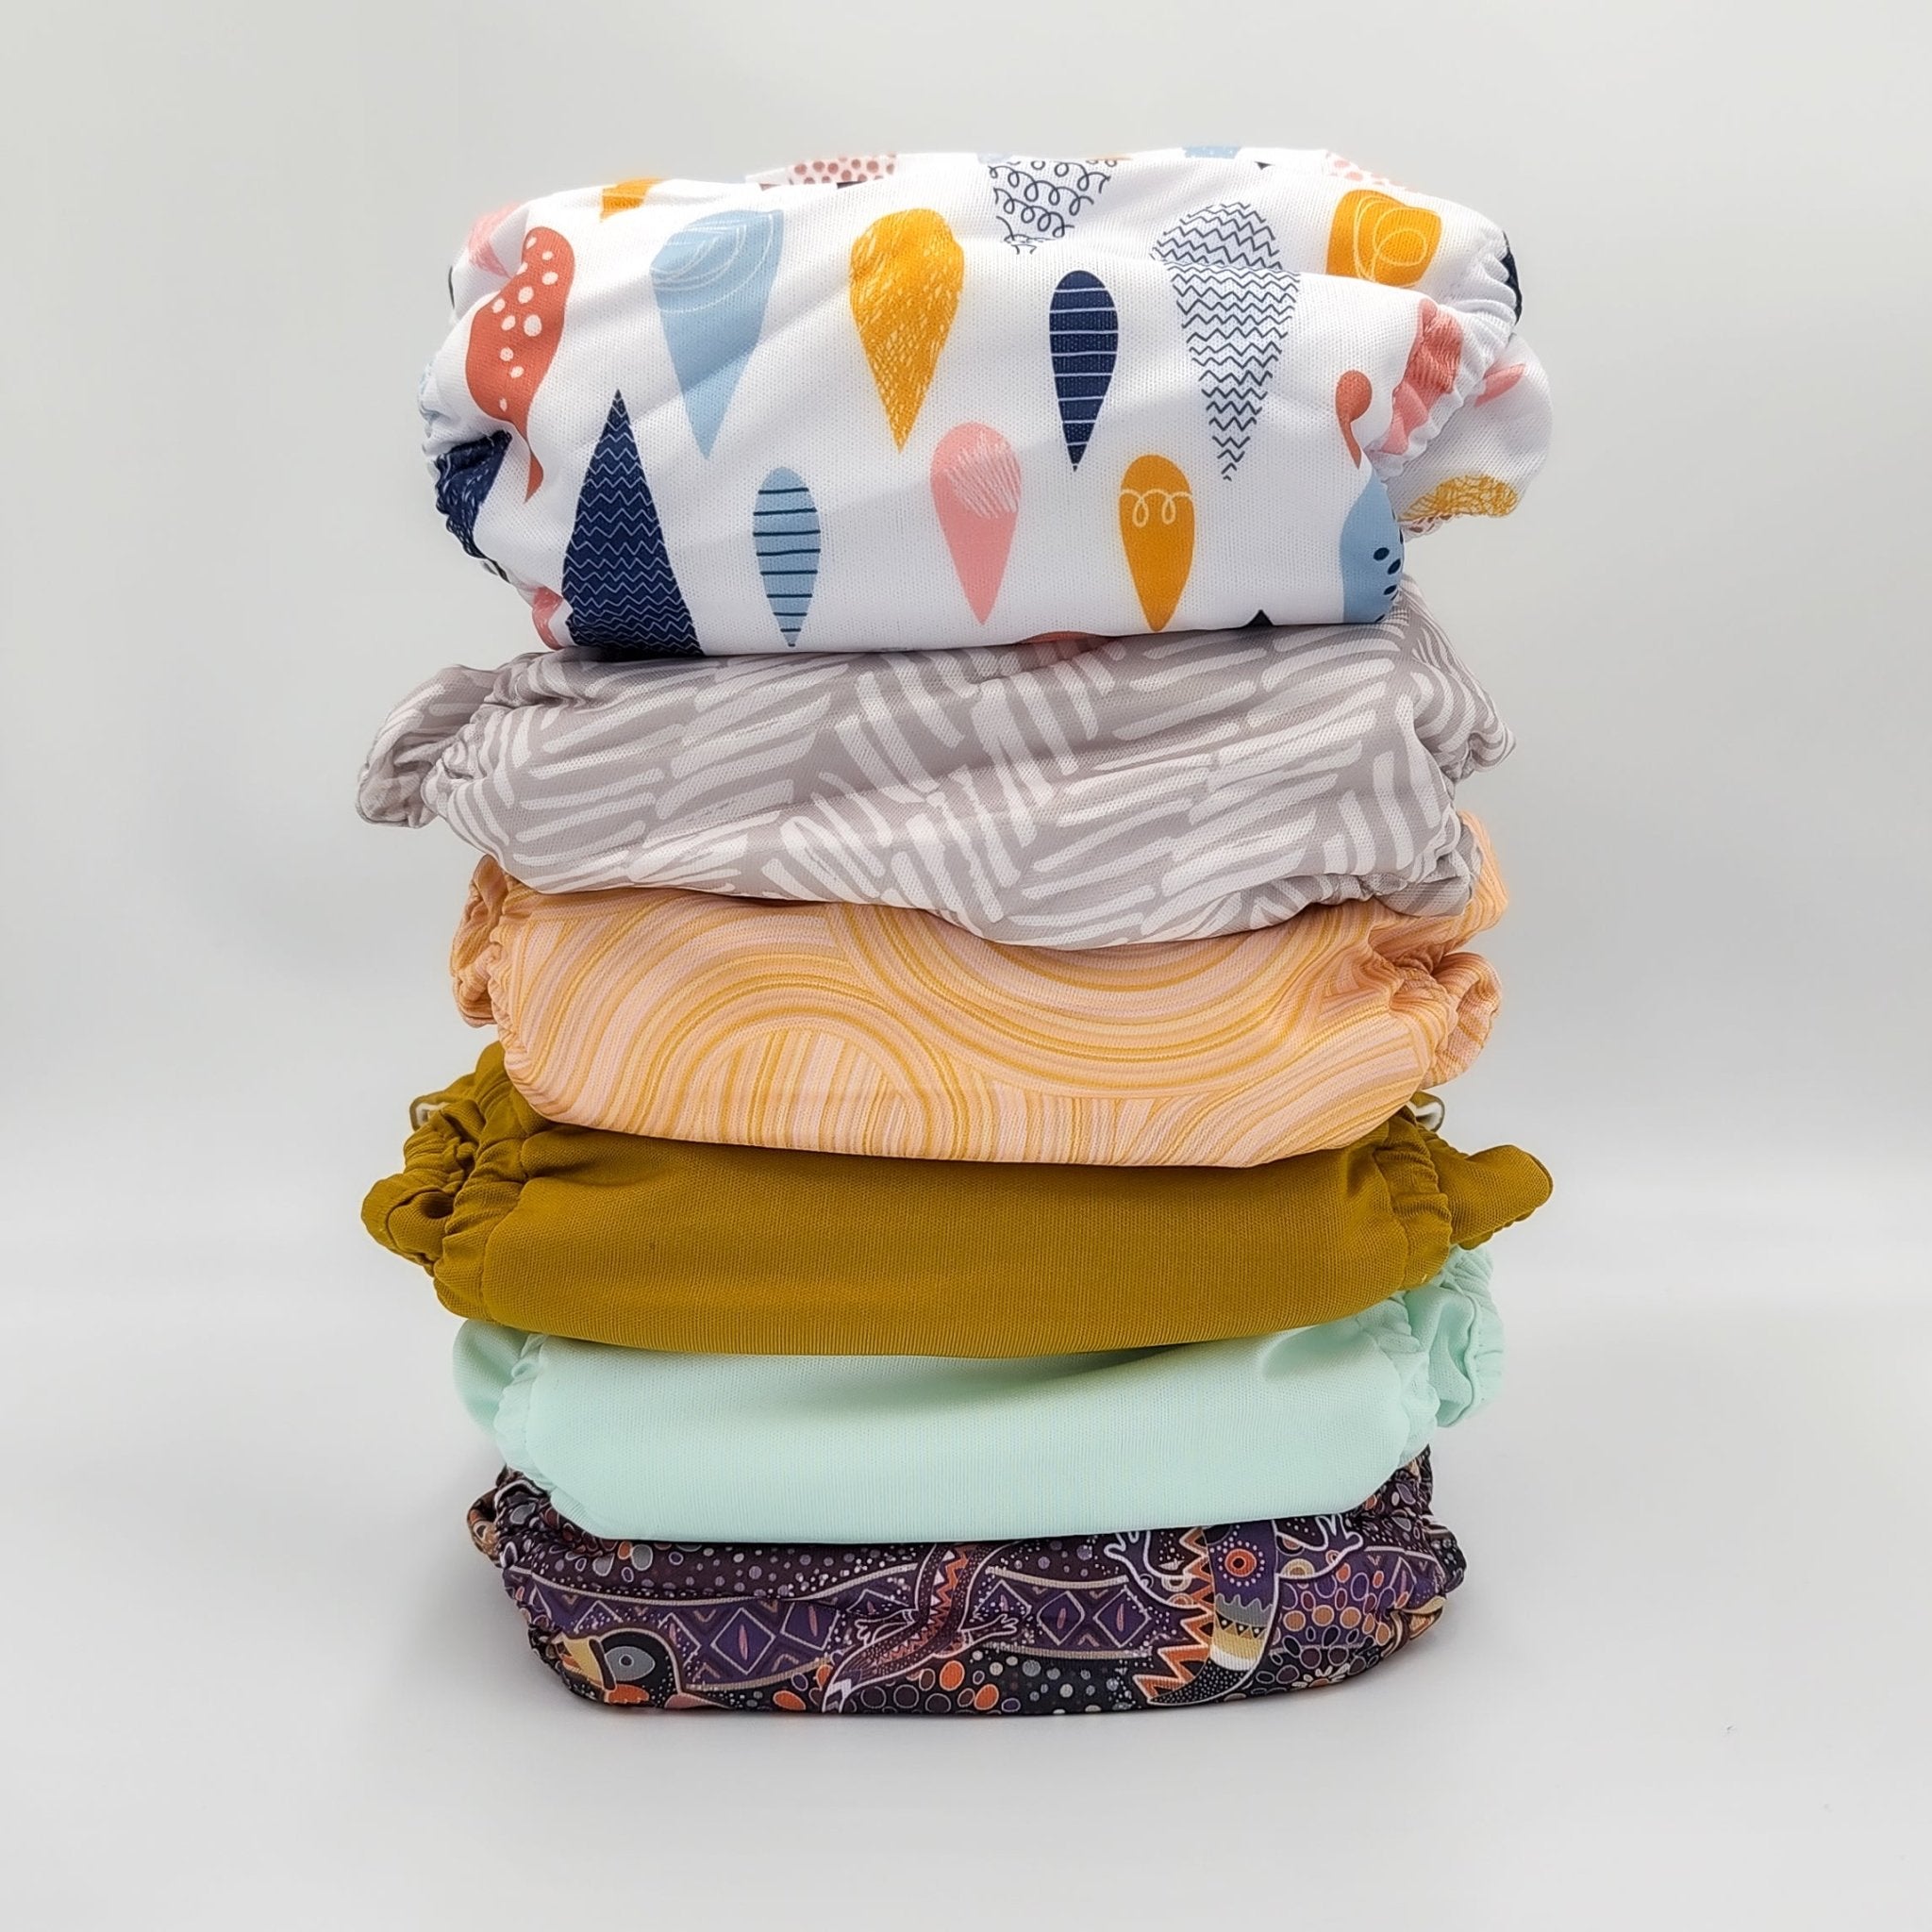 Reusable Modern Cloth Nappy 6 Pack - 'The Starter' - Be Bliss Baby